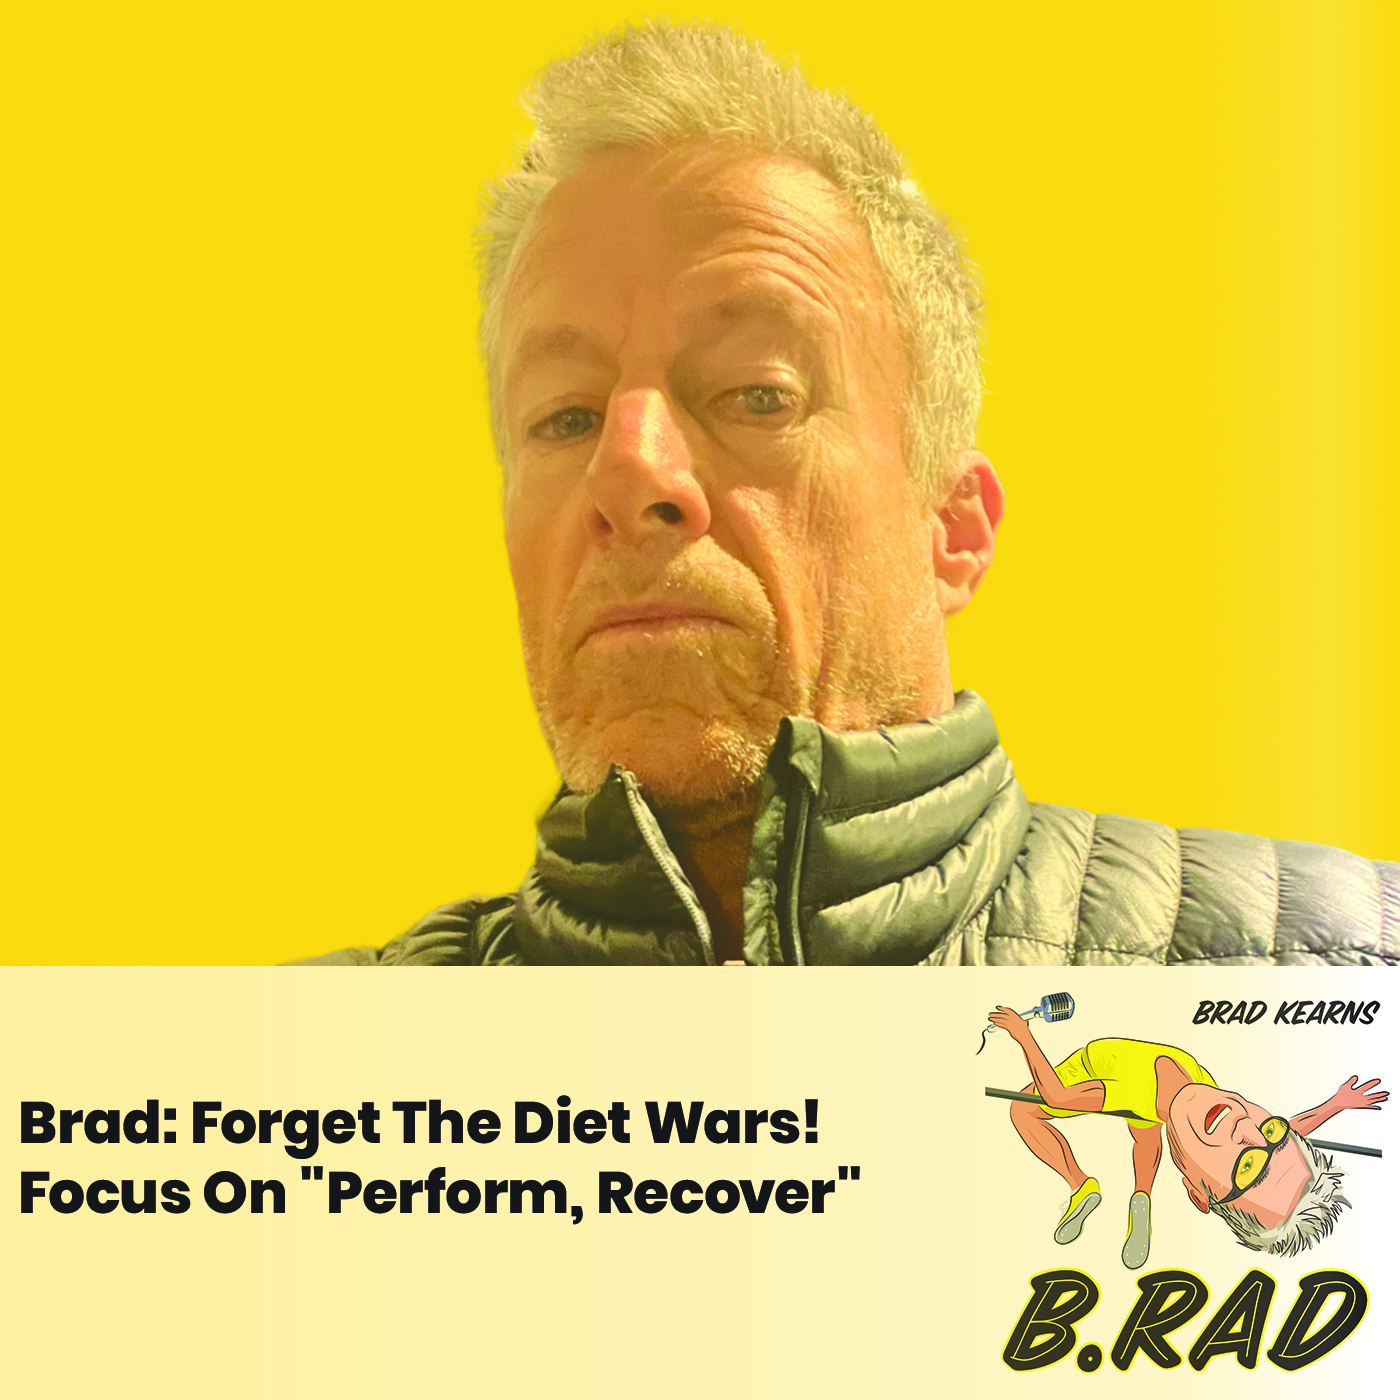 Brad: Forget The Diet Wars! Focus On "Perform, Recover"